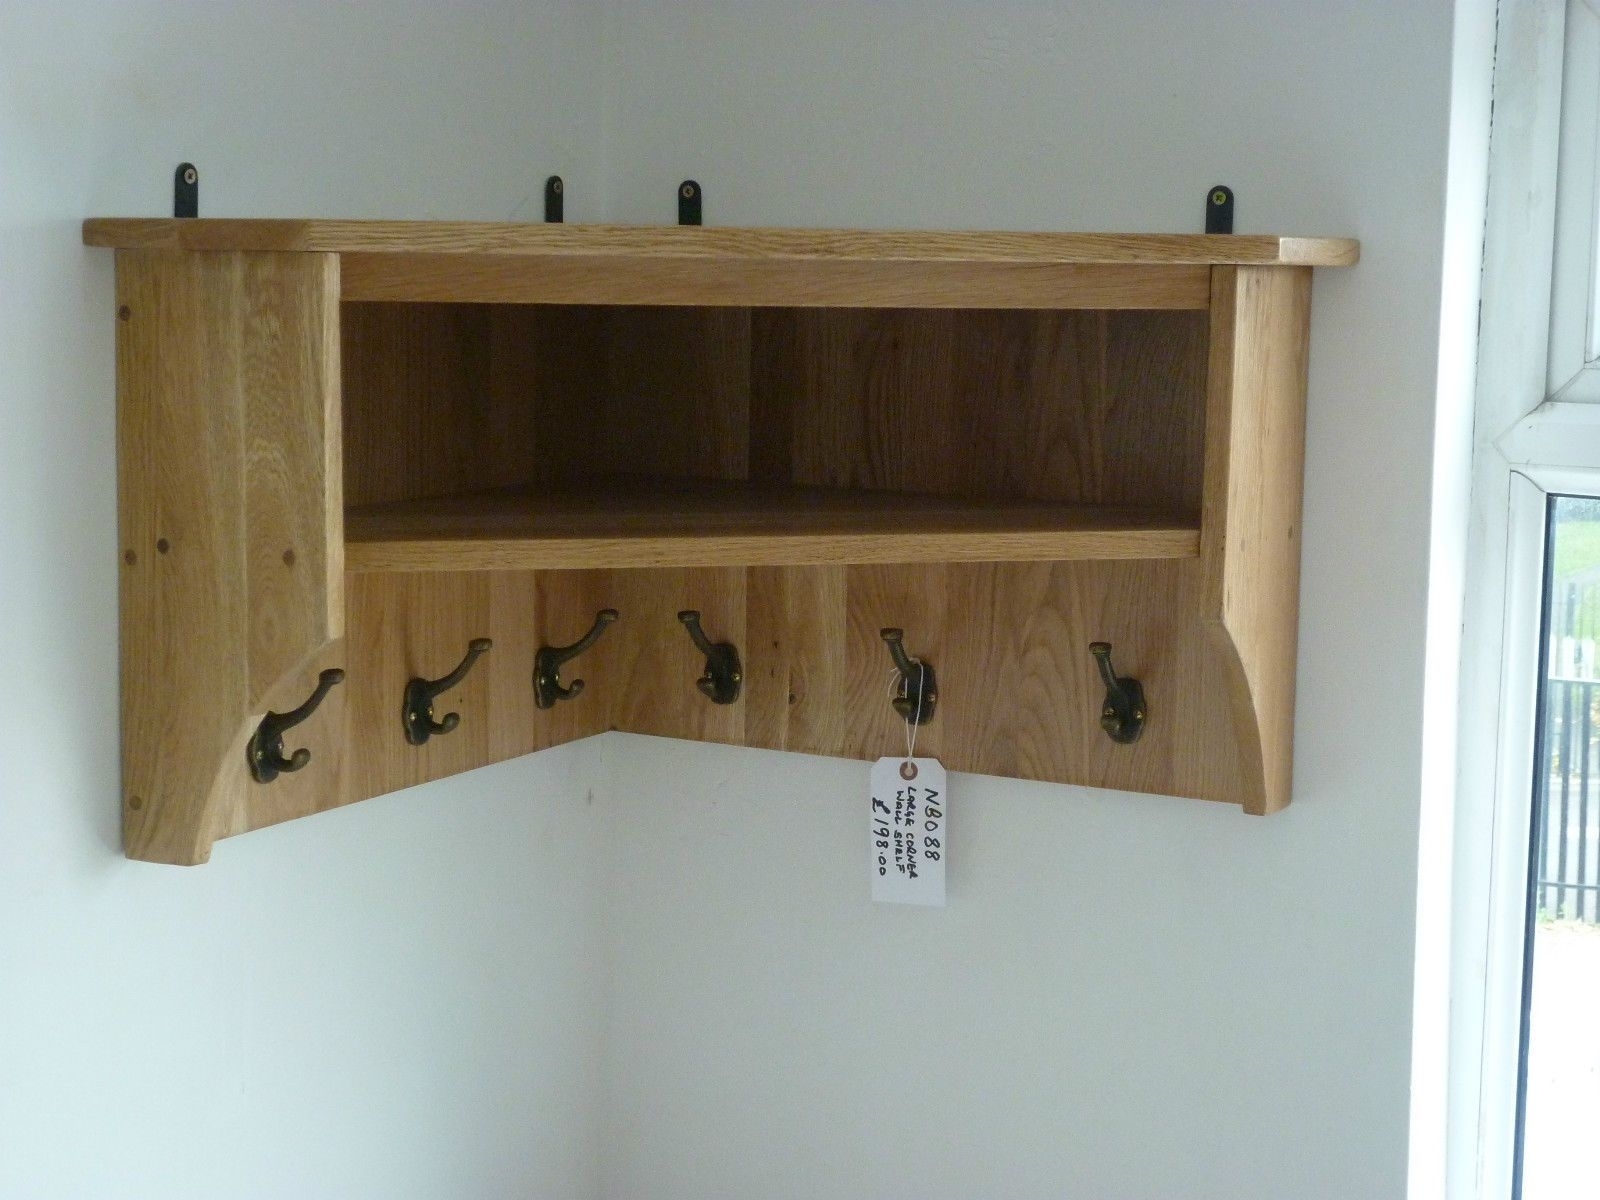 Rustic Coffee Shelf with Hooks and Floating Storage UK